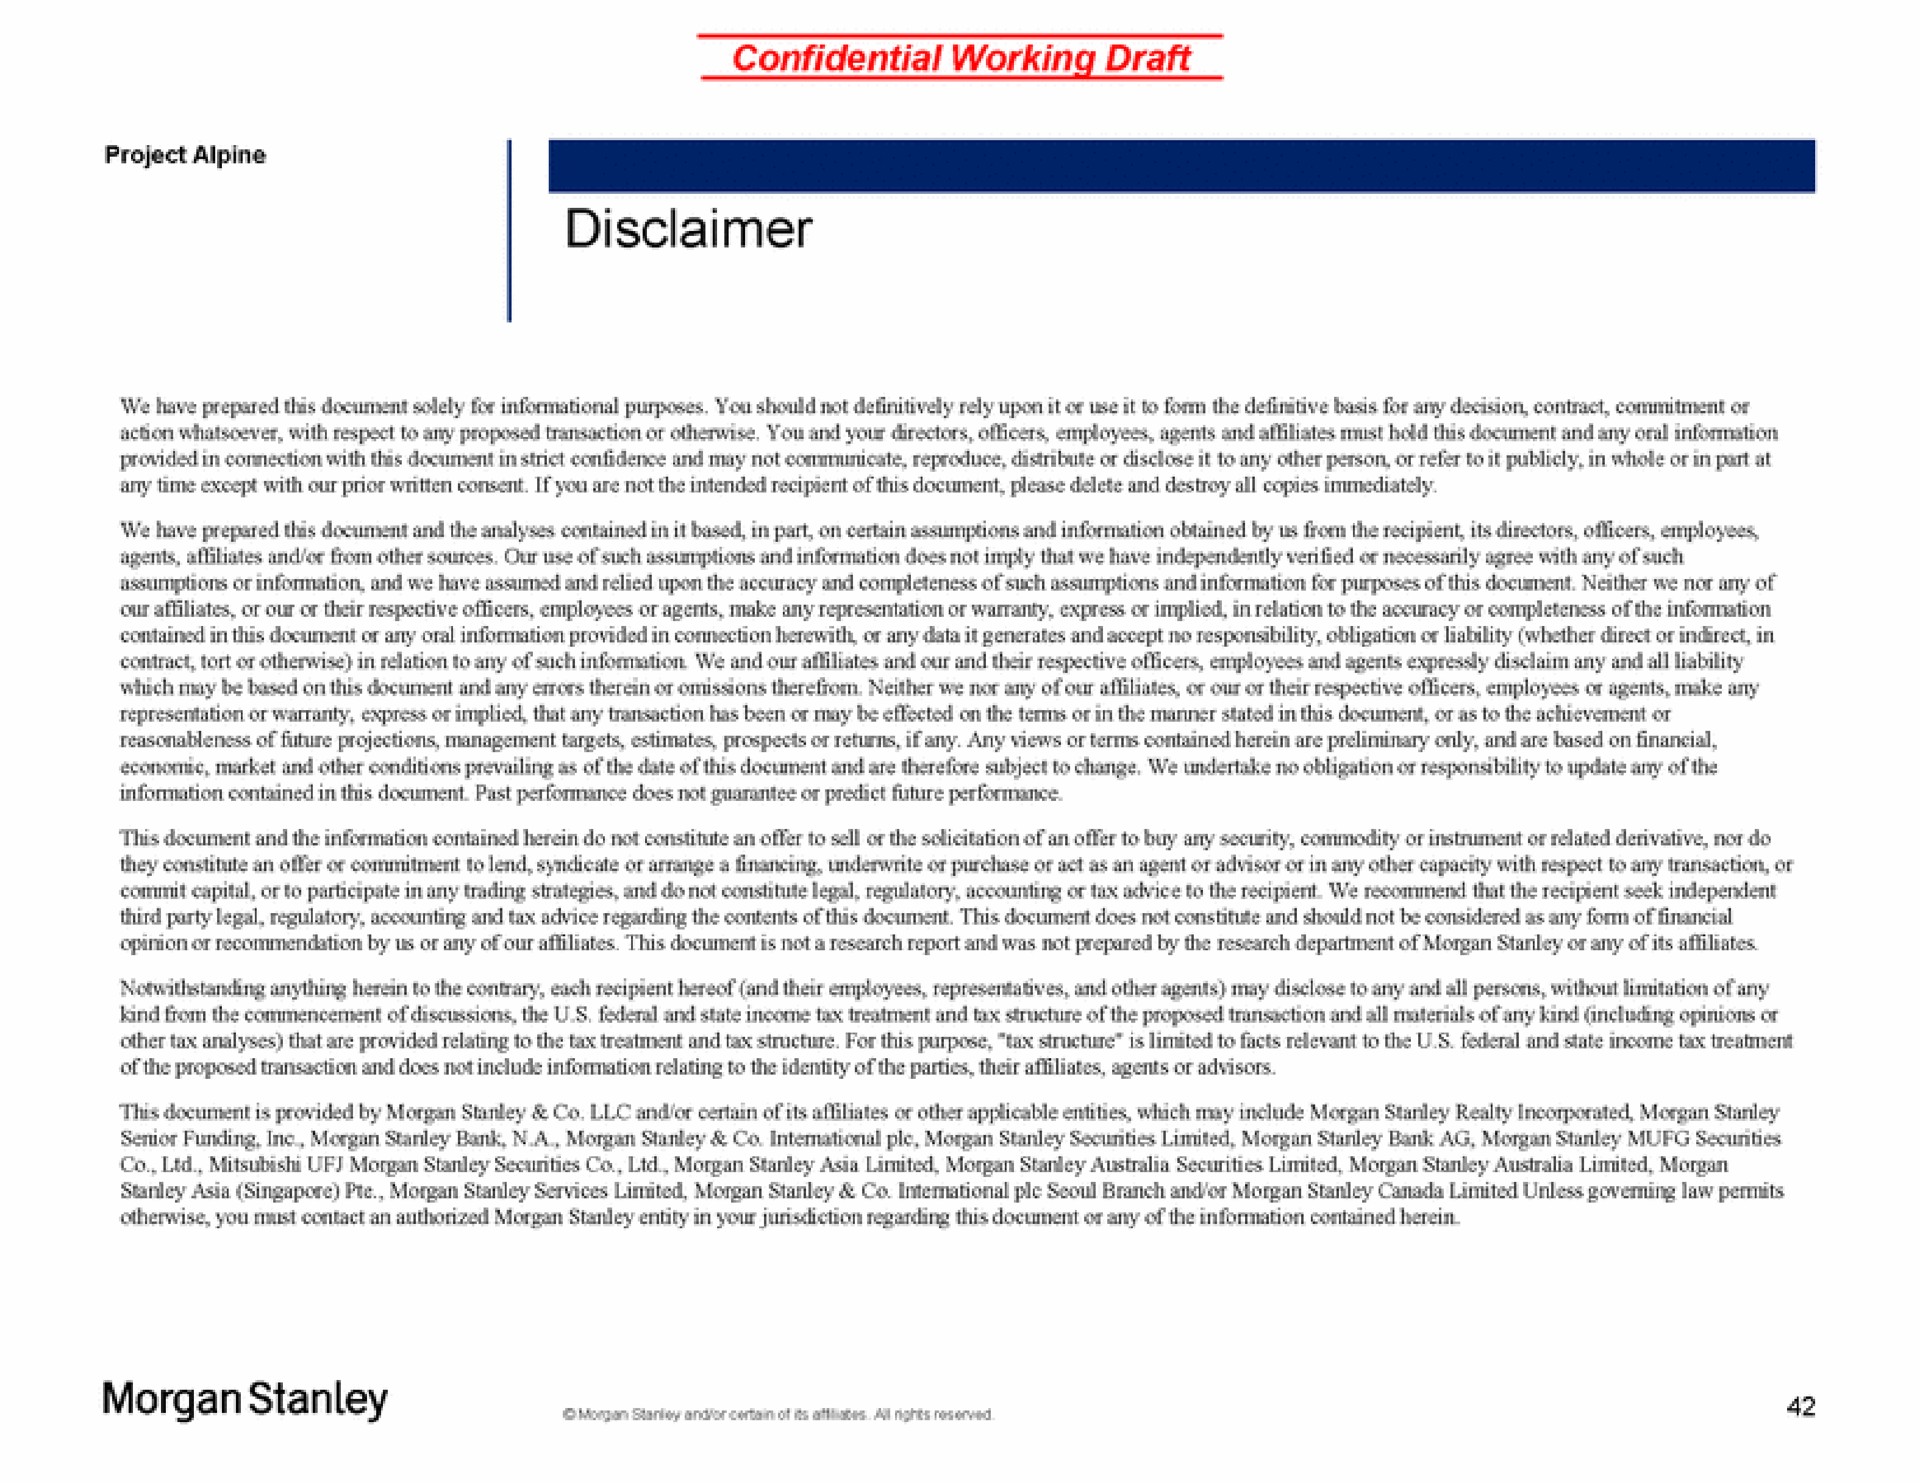 confidential working draft disclaimer | Morgan Stanley